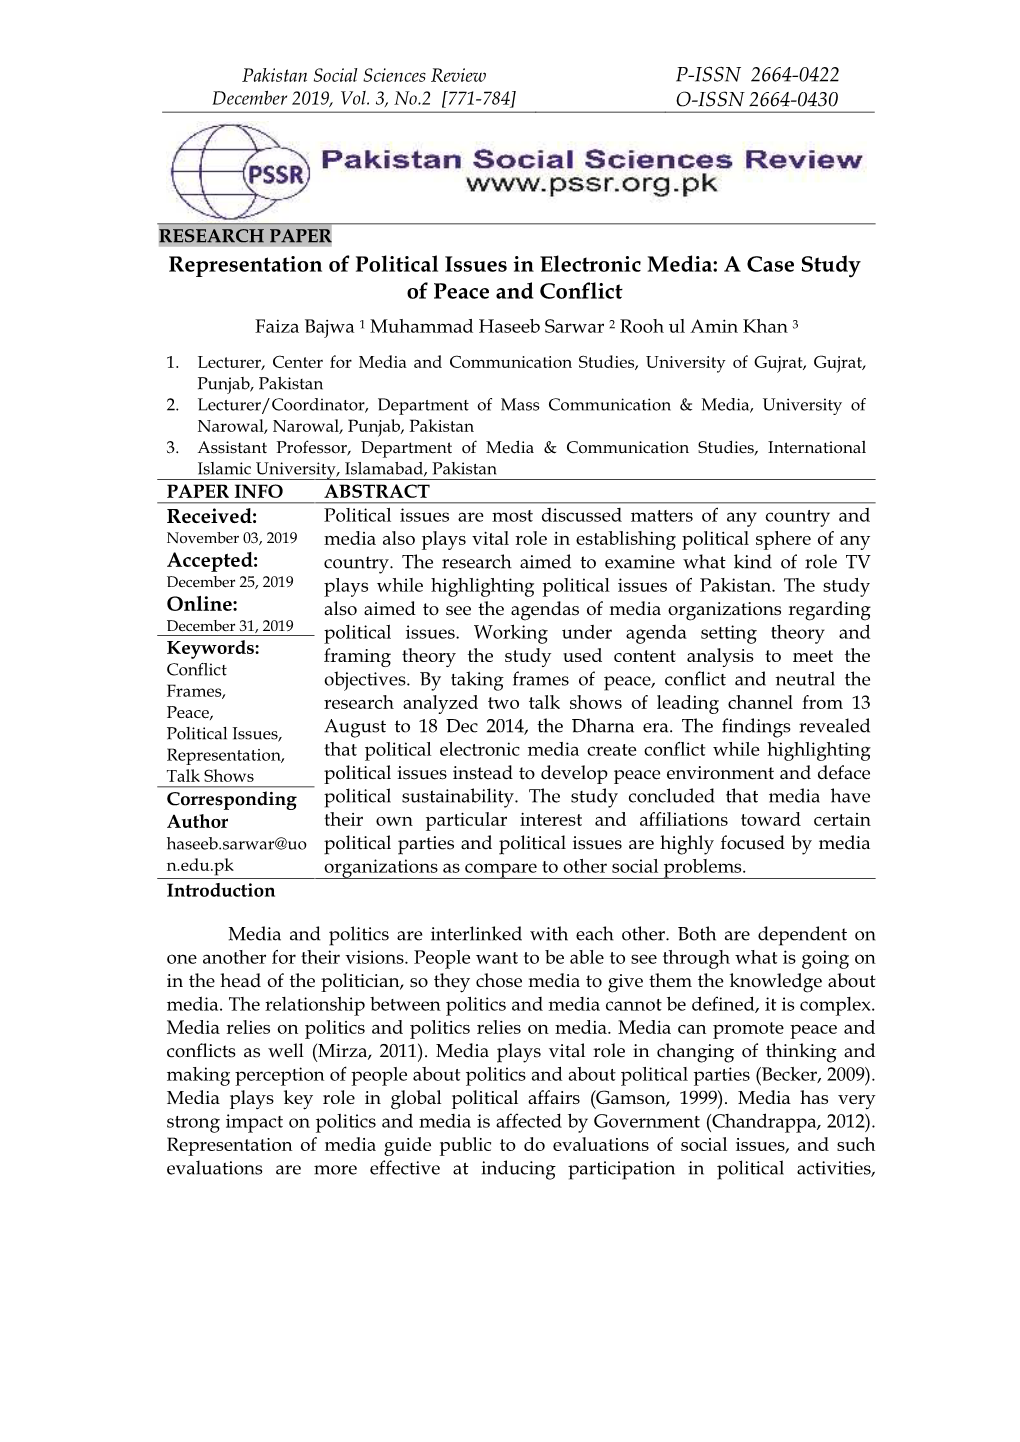 Representation of Political Issues in Electronic Media: a Case Study of Peace and Conflict Faiza Bajwa 1 Muhammad Haseeb Sarwar 2 Rooh Ul Amin Khan 3